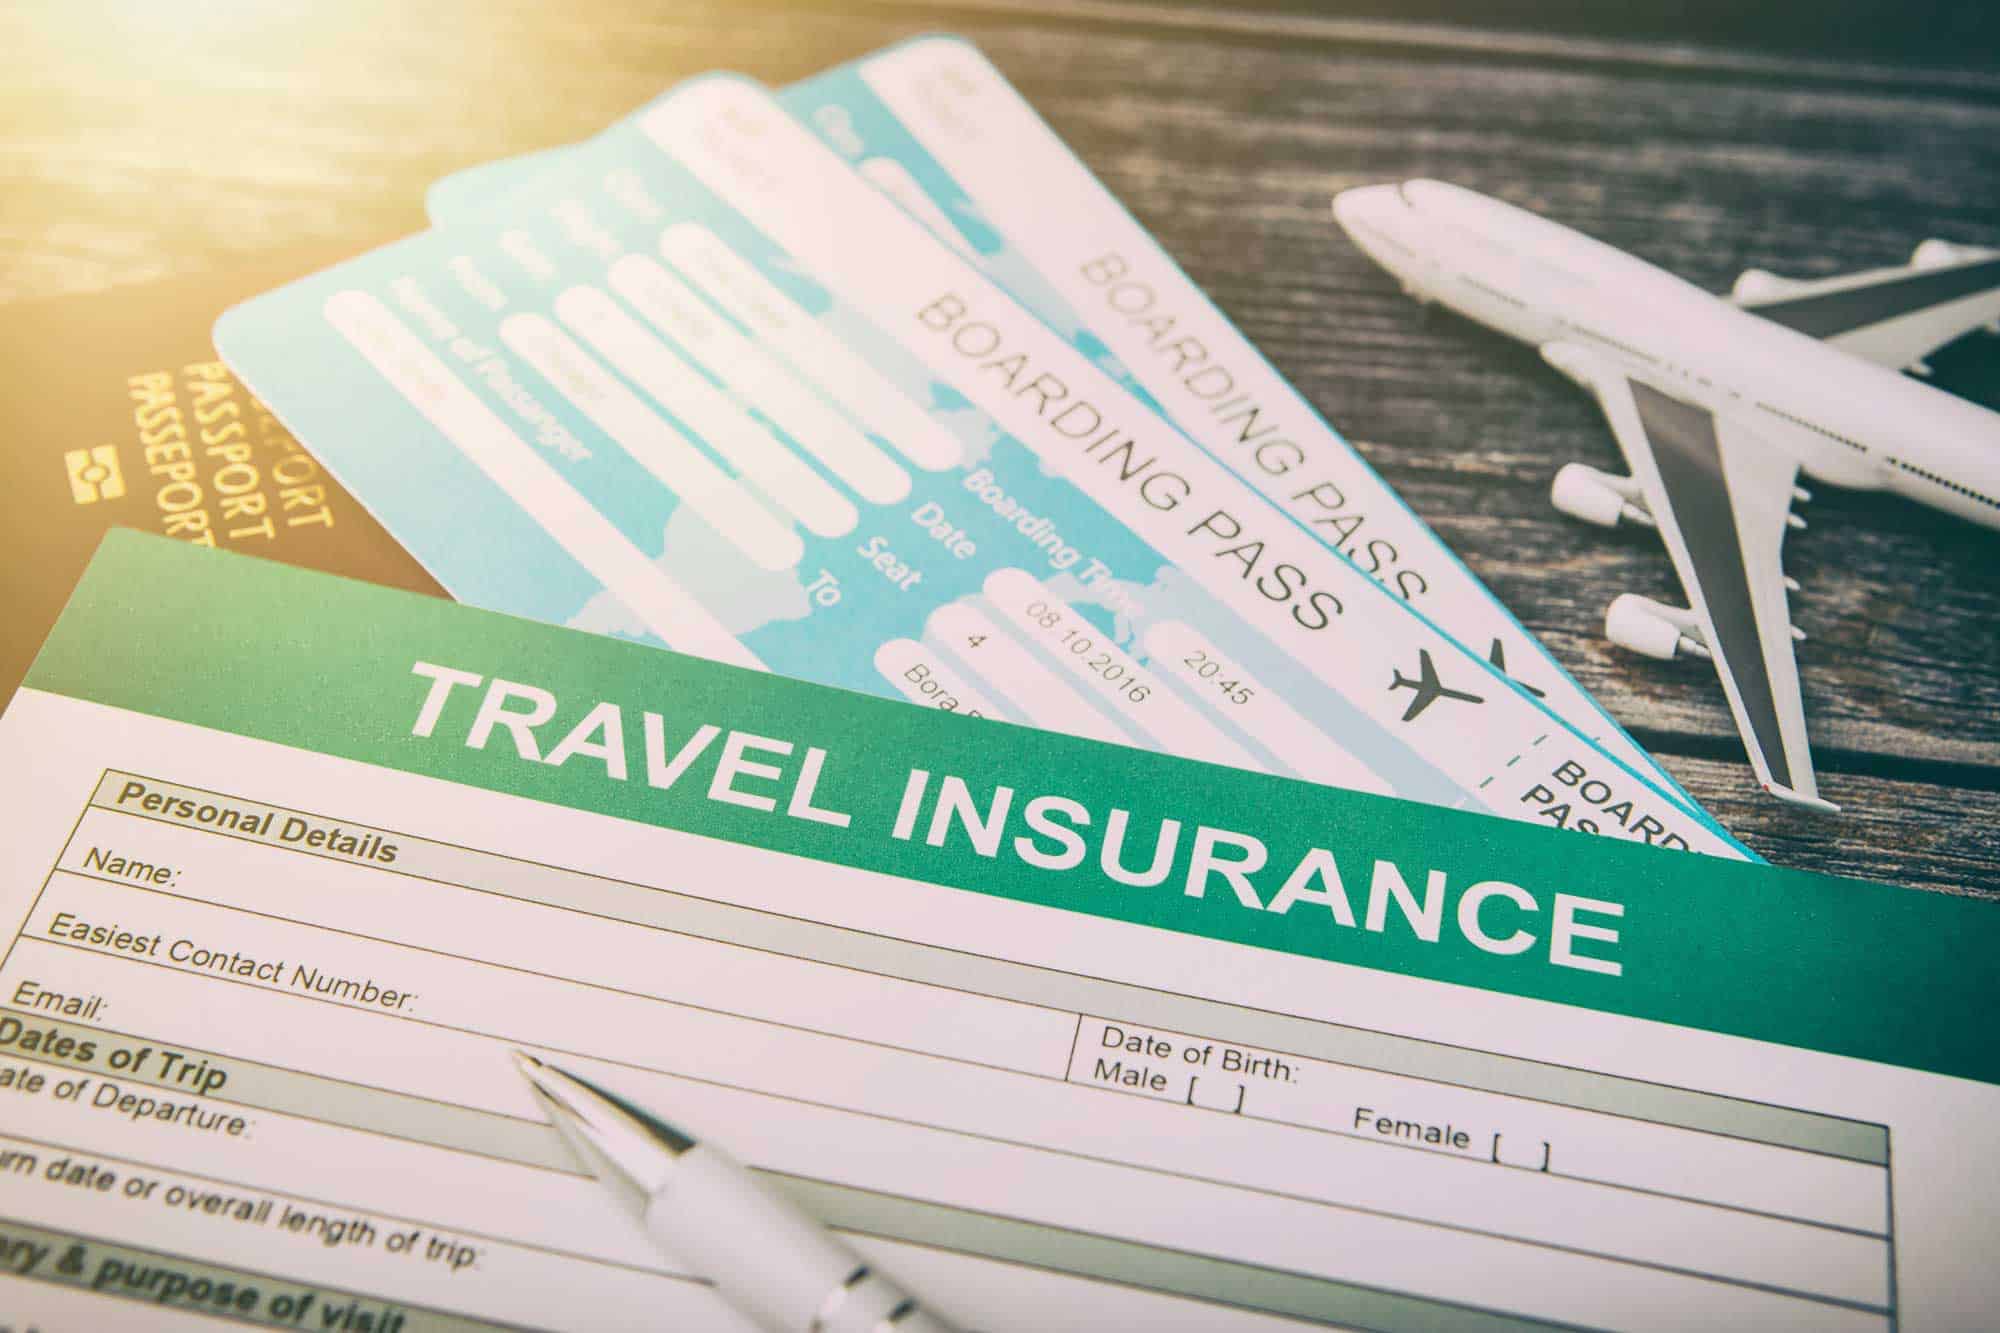 What else do I need to know about business accident and travel insurance?